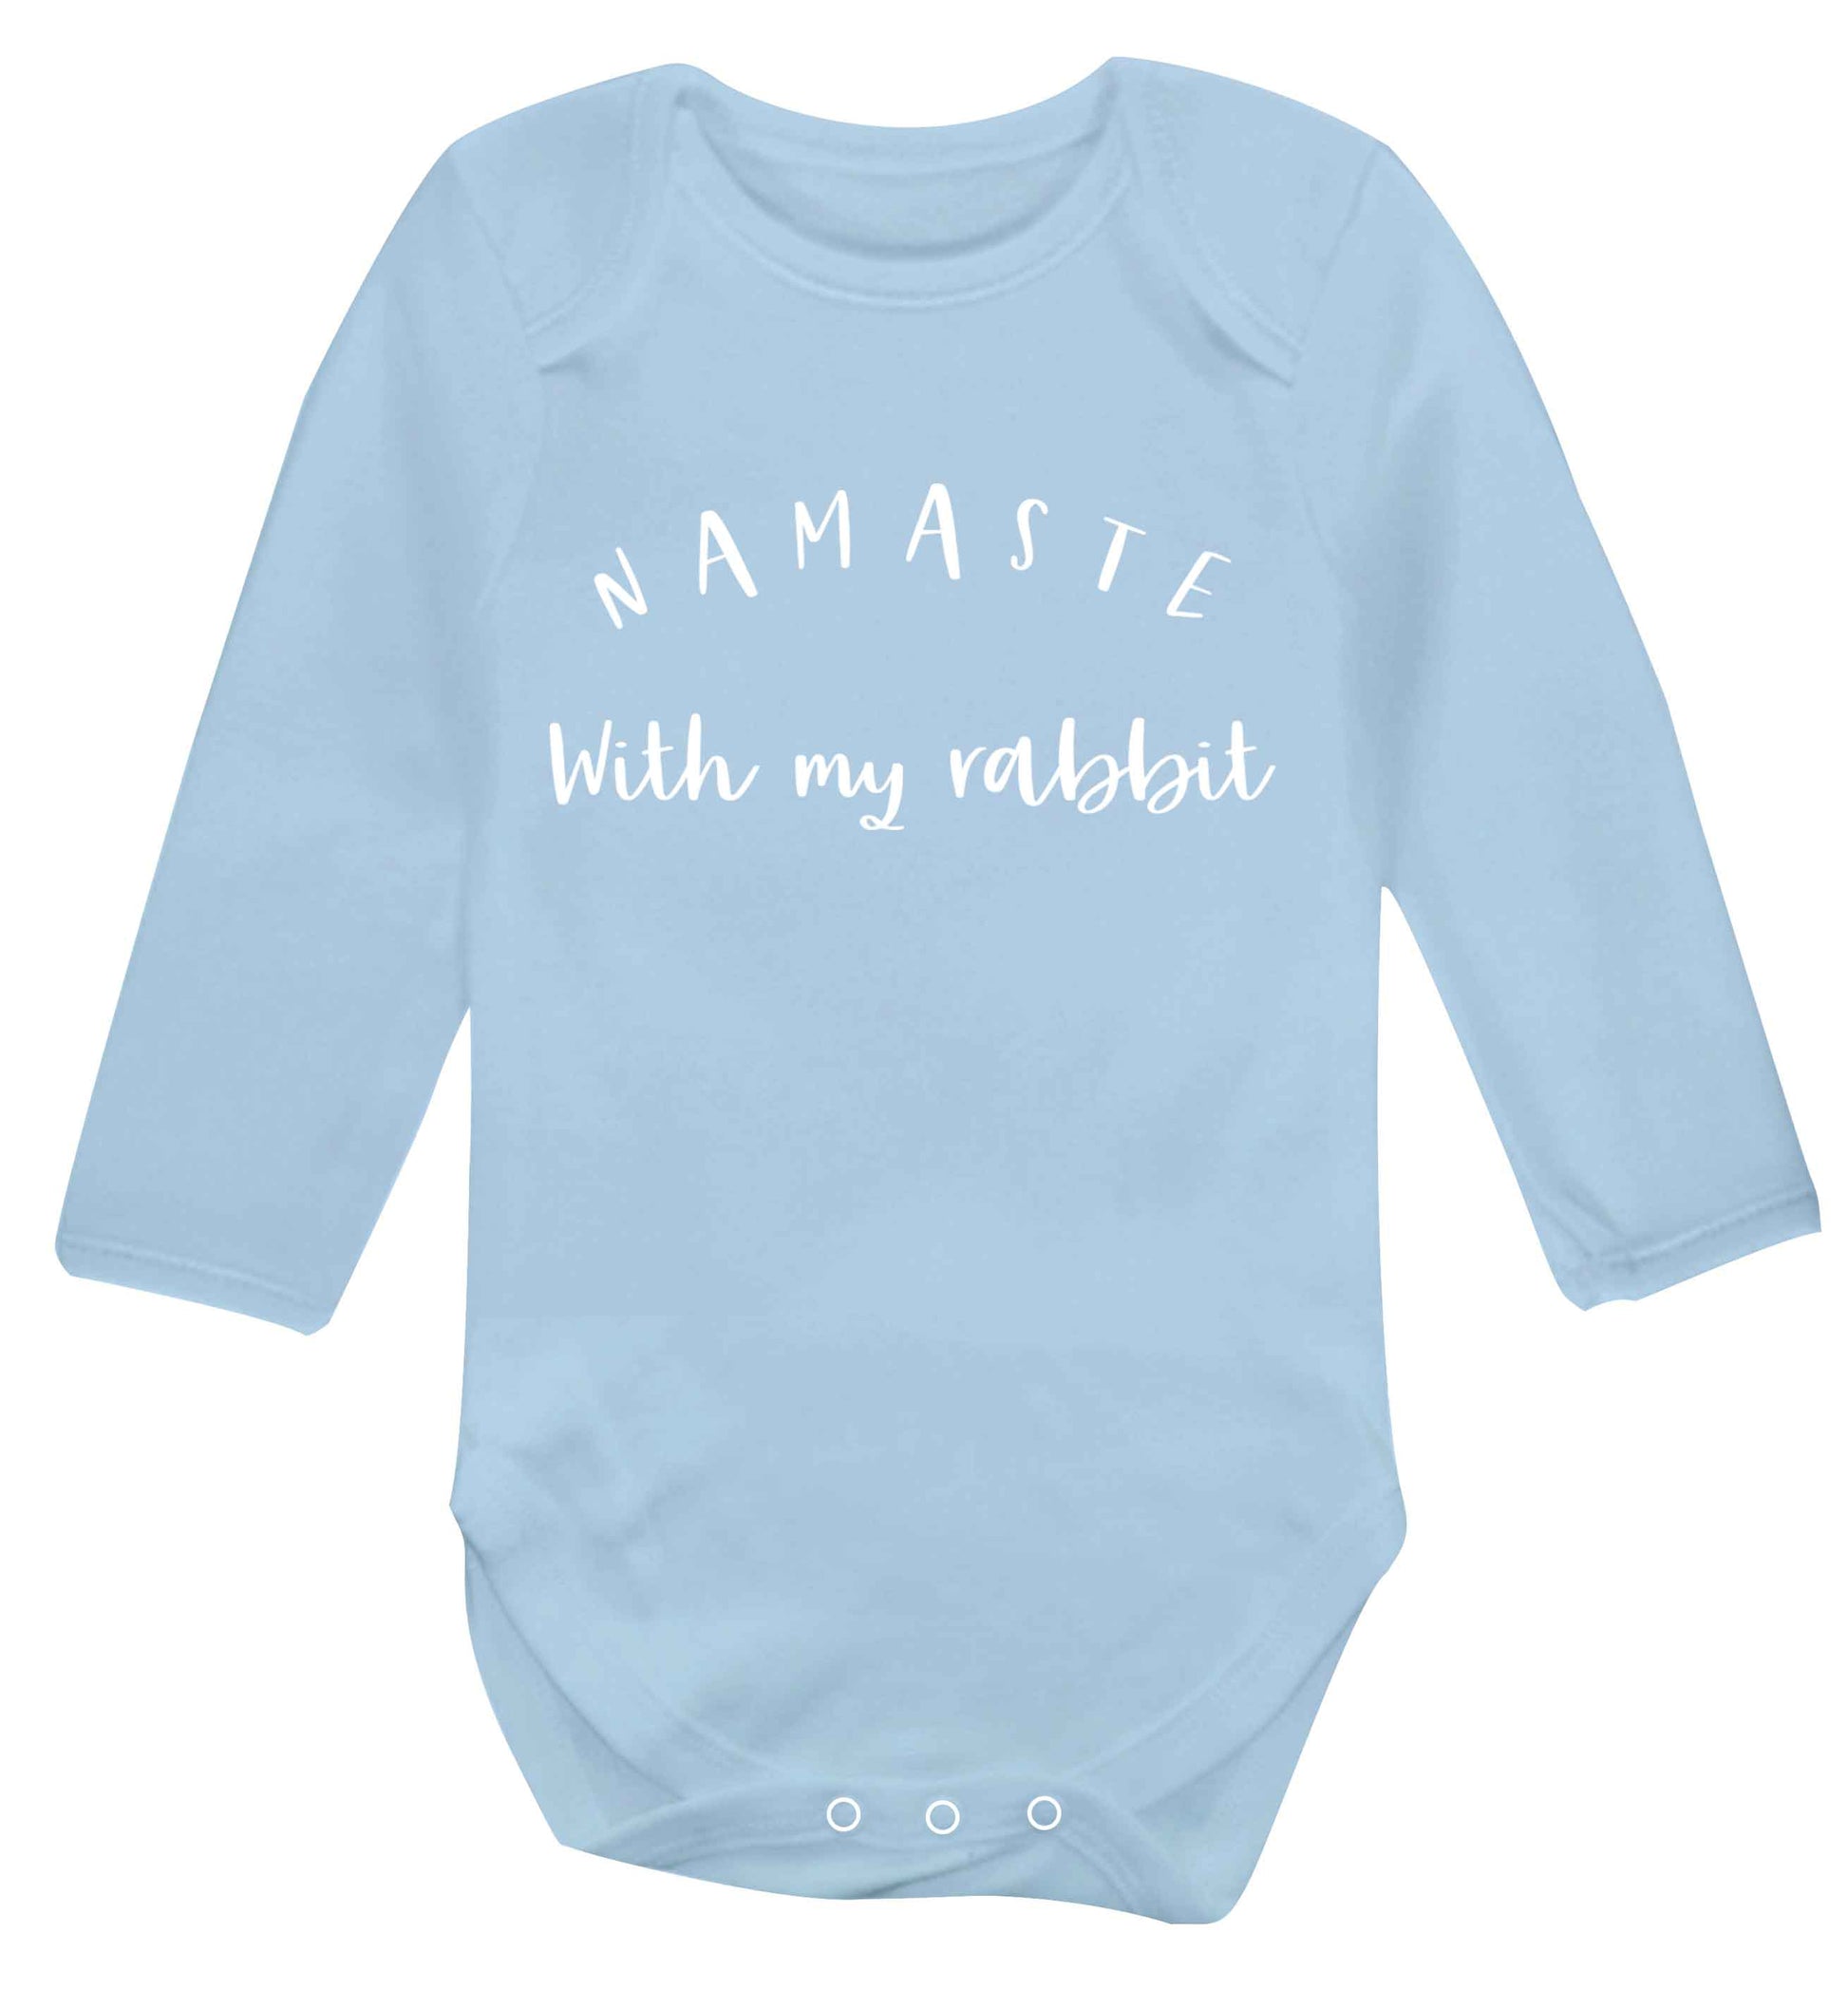 Namaste with my rabbit Baby Vest long sleeved pale blue 6-12 months